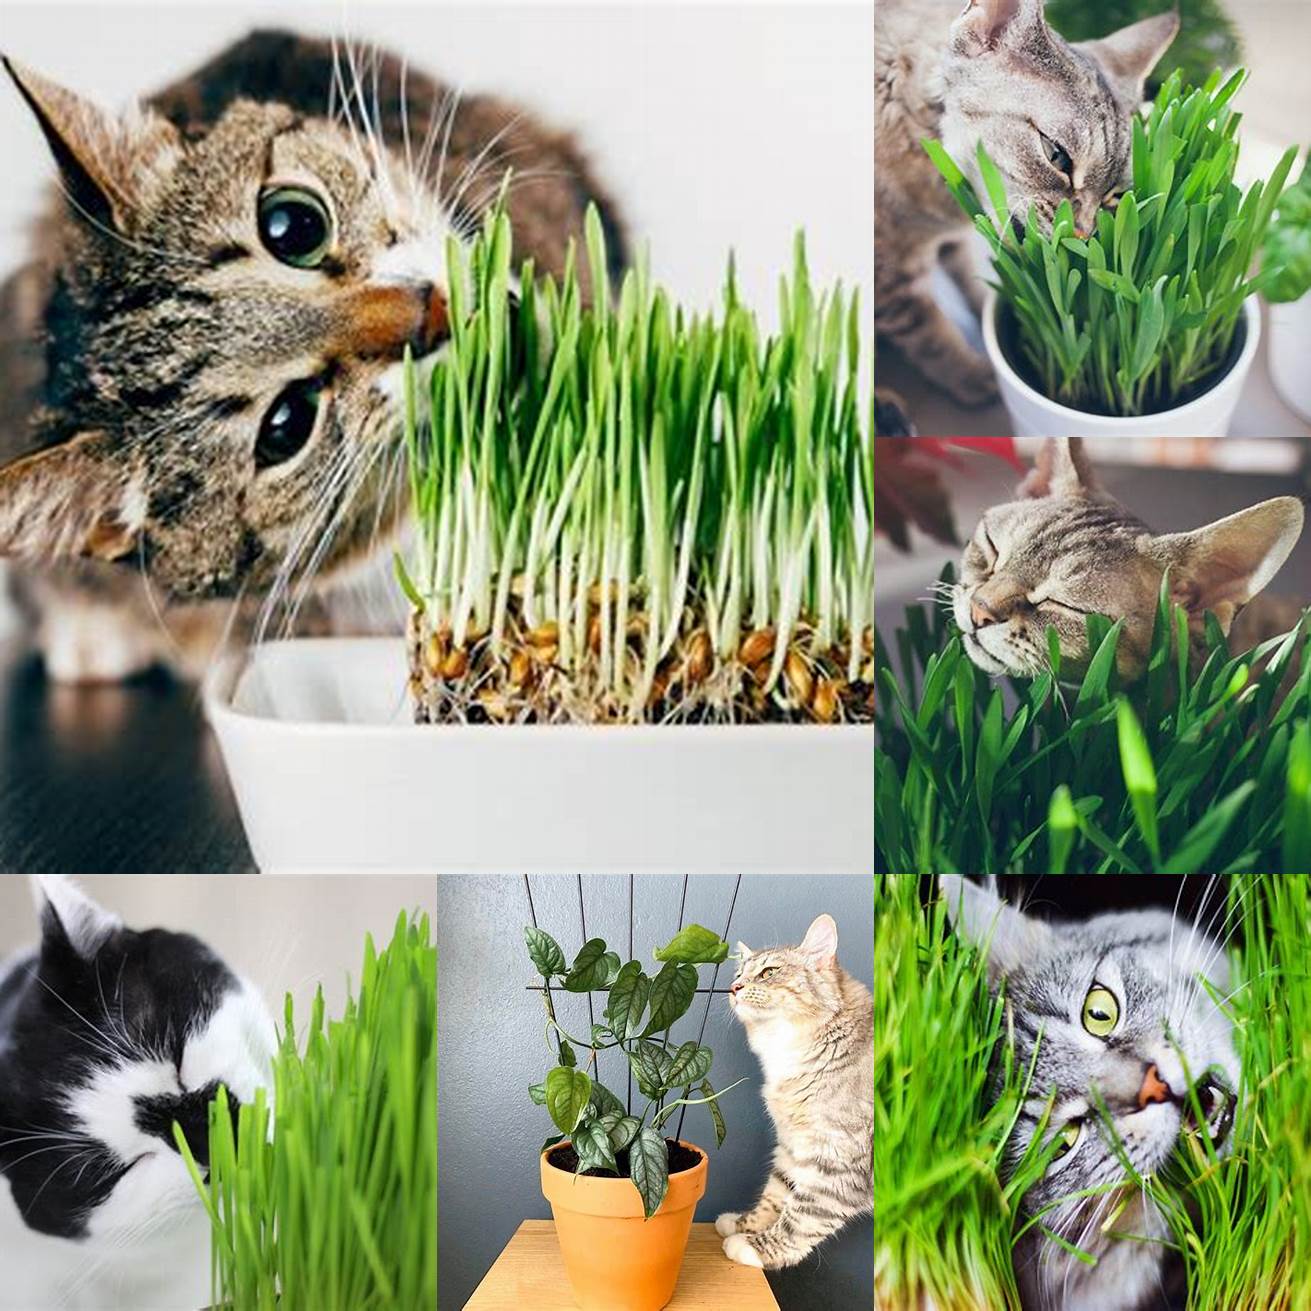 Satisfying the urge to chew Cats have a natural instinct to chew on plants and cat grass provides a safe and healthy outlet for that behavior